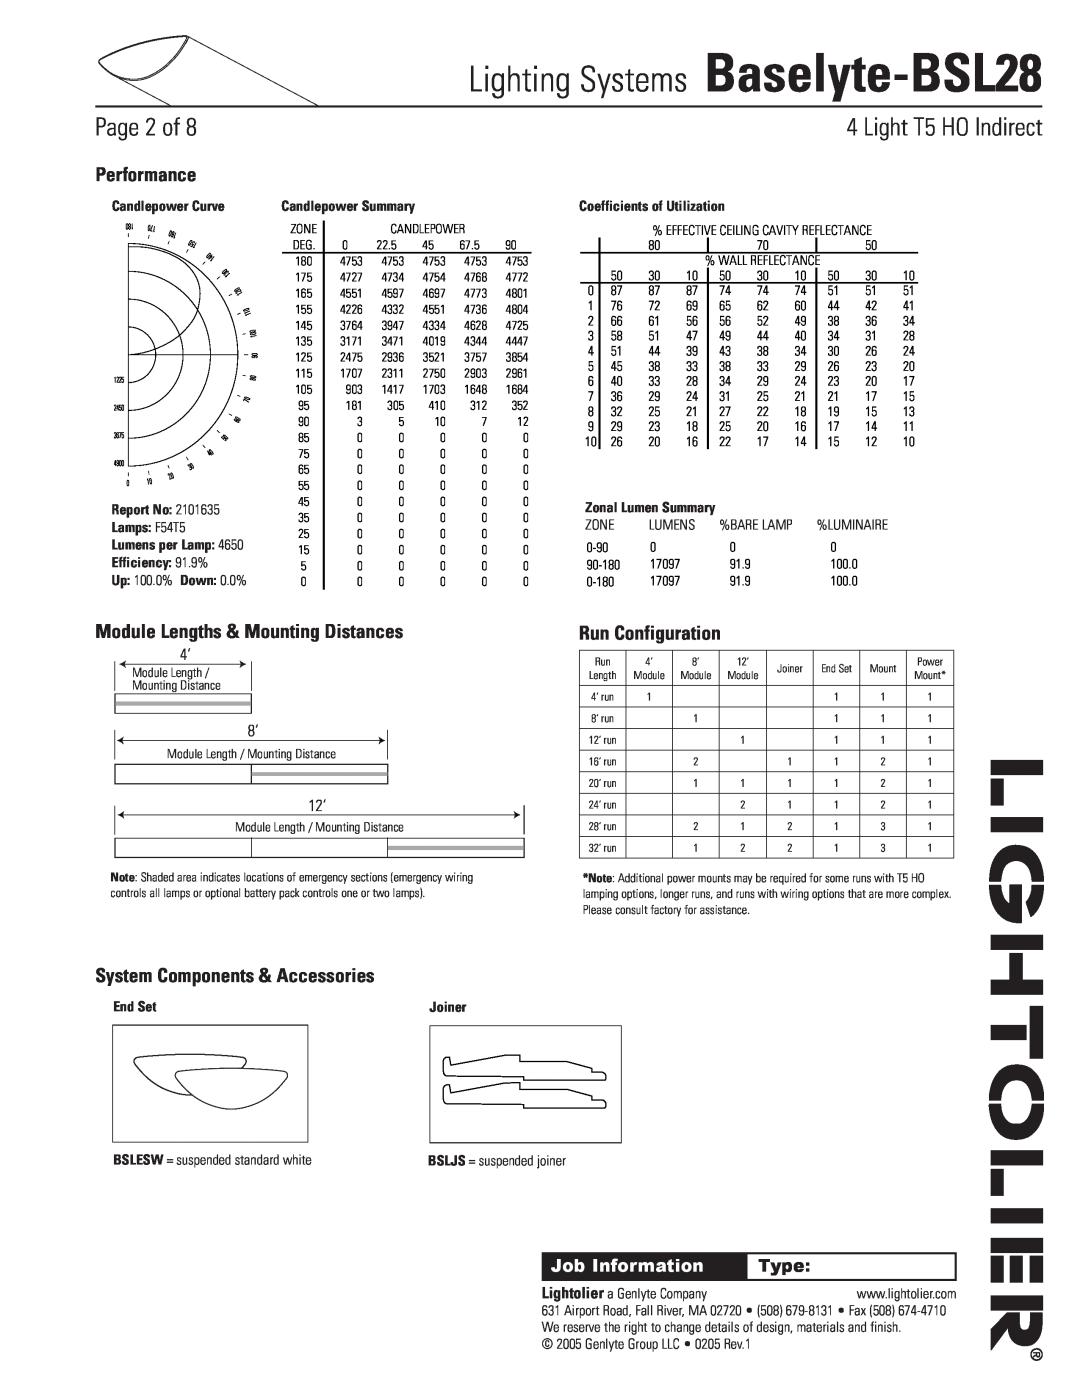 Lightolier Lighting Systems Baselyte-BSL28, Module Lengths & Mounting Distances, Run Configuration, Type, Performance 